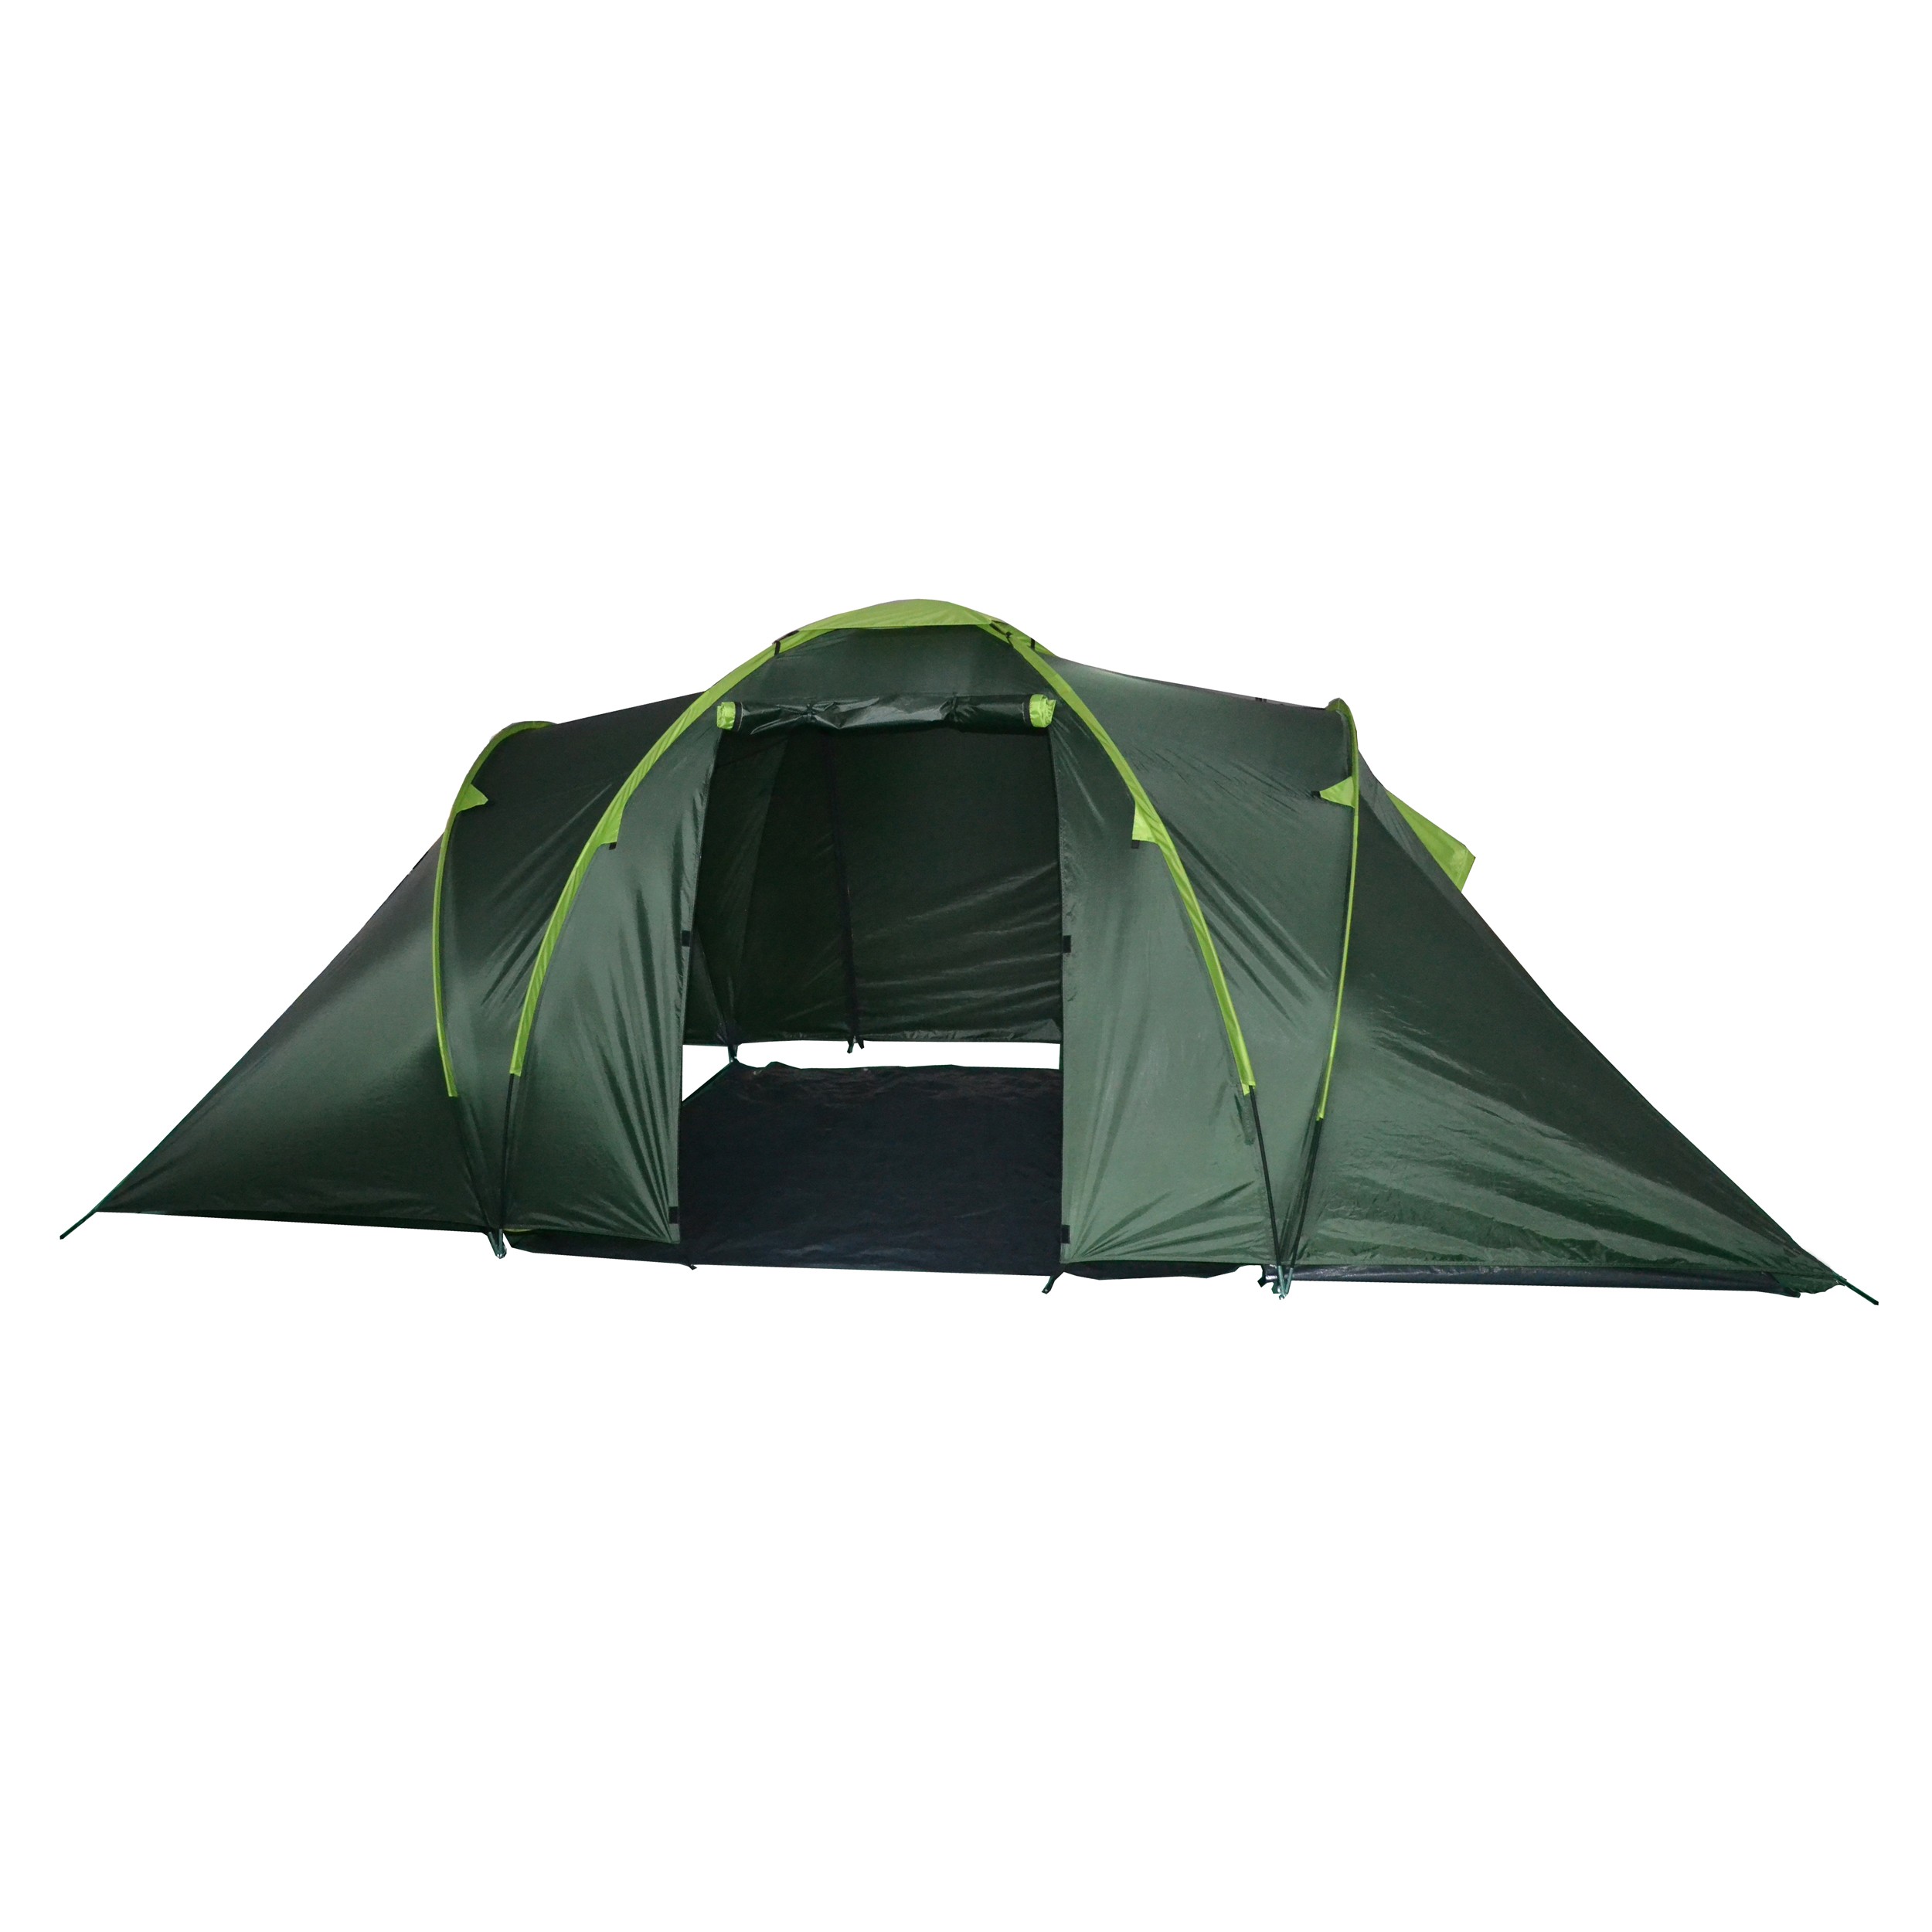 protection Climatic mountains Beer Cort camping, 6 persoane, poliester, 460 x 10 x 190 cm, verde camuflaj -  eMAG.ro